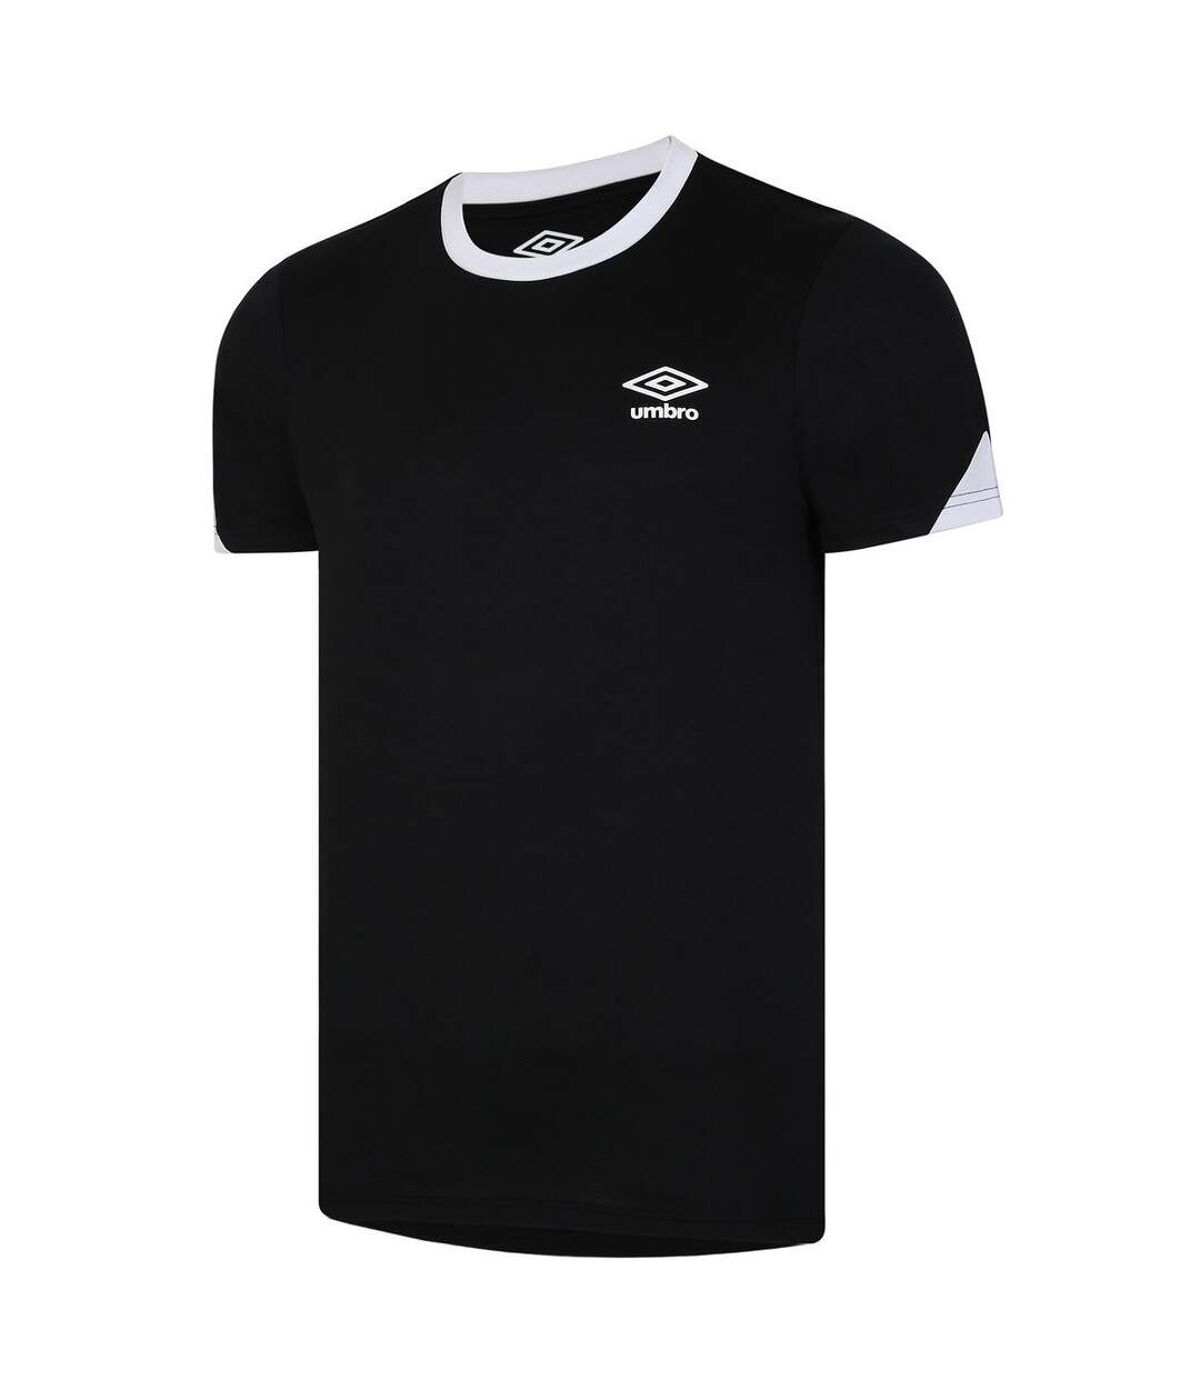 Umbro - Maillot TOTAL - Homme (Noir / Blanc) - UTUO836